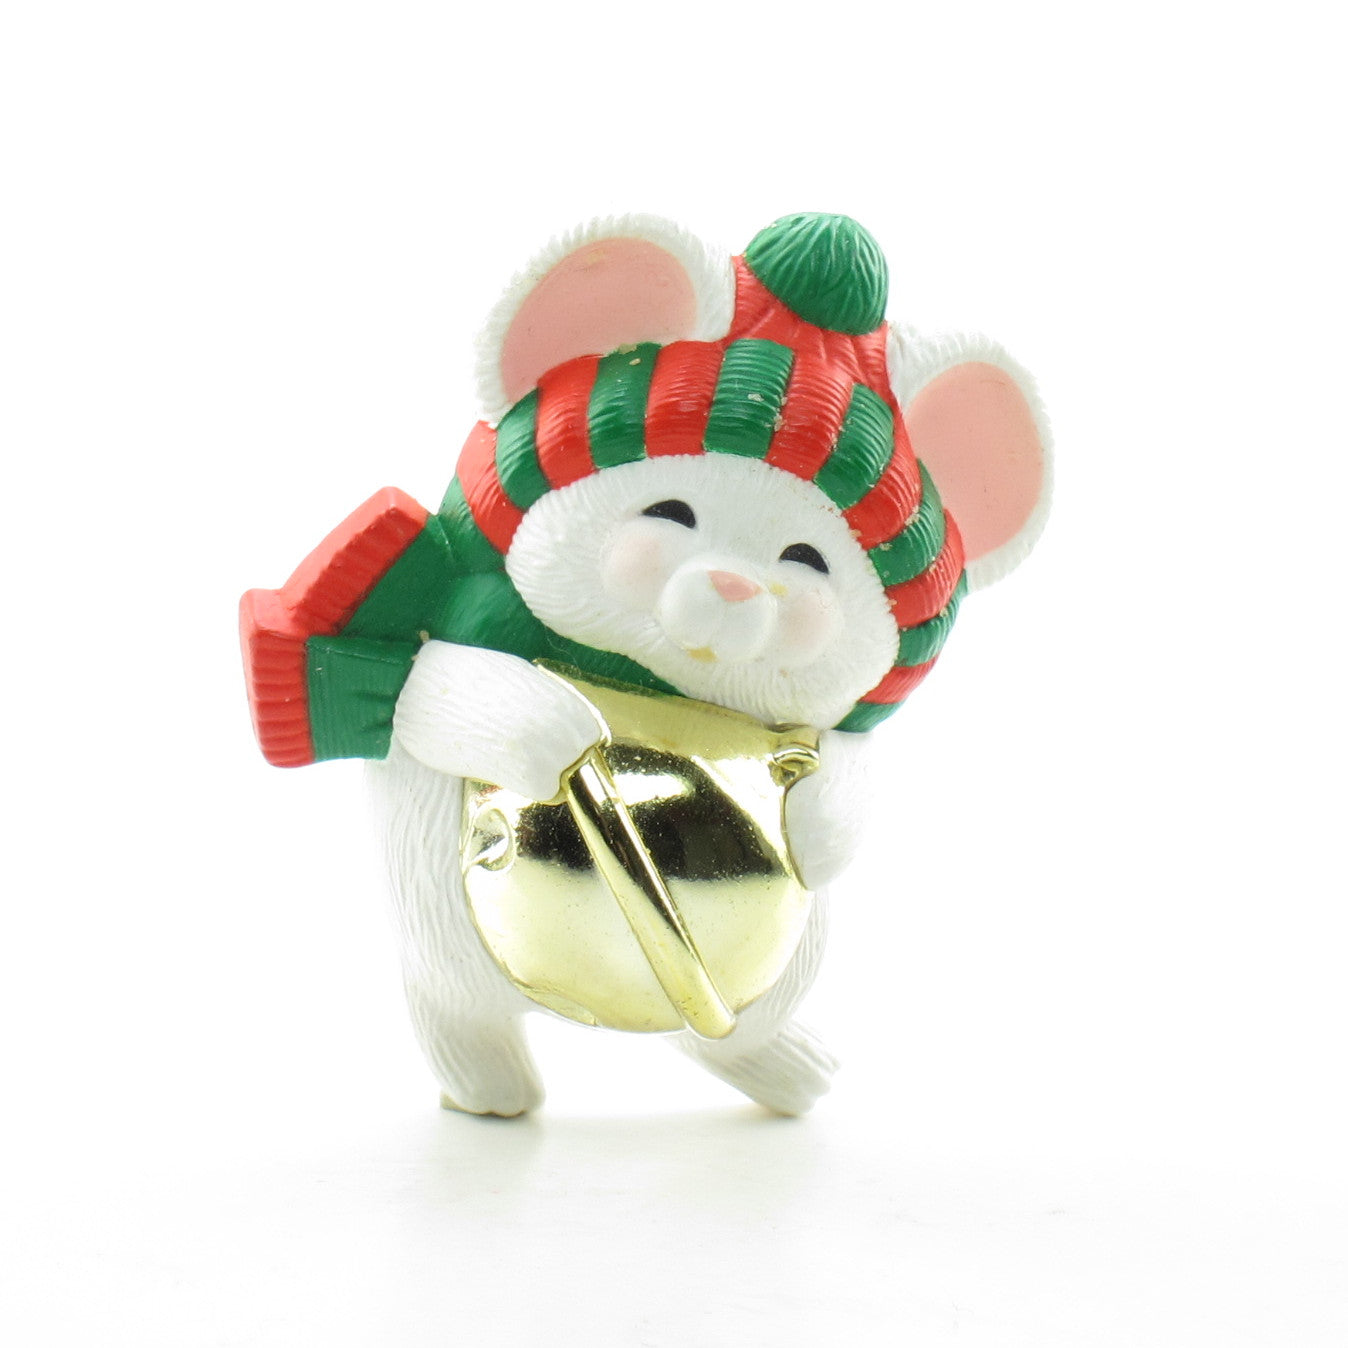 White mouse with red and green hat and scarf and gold jingle bell pin